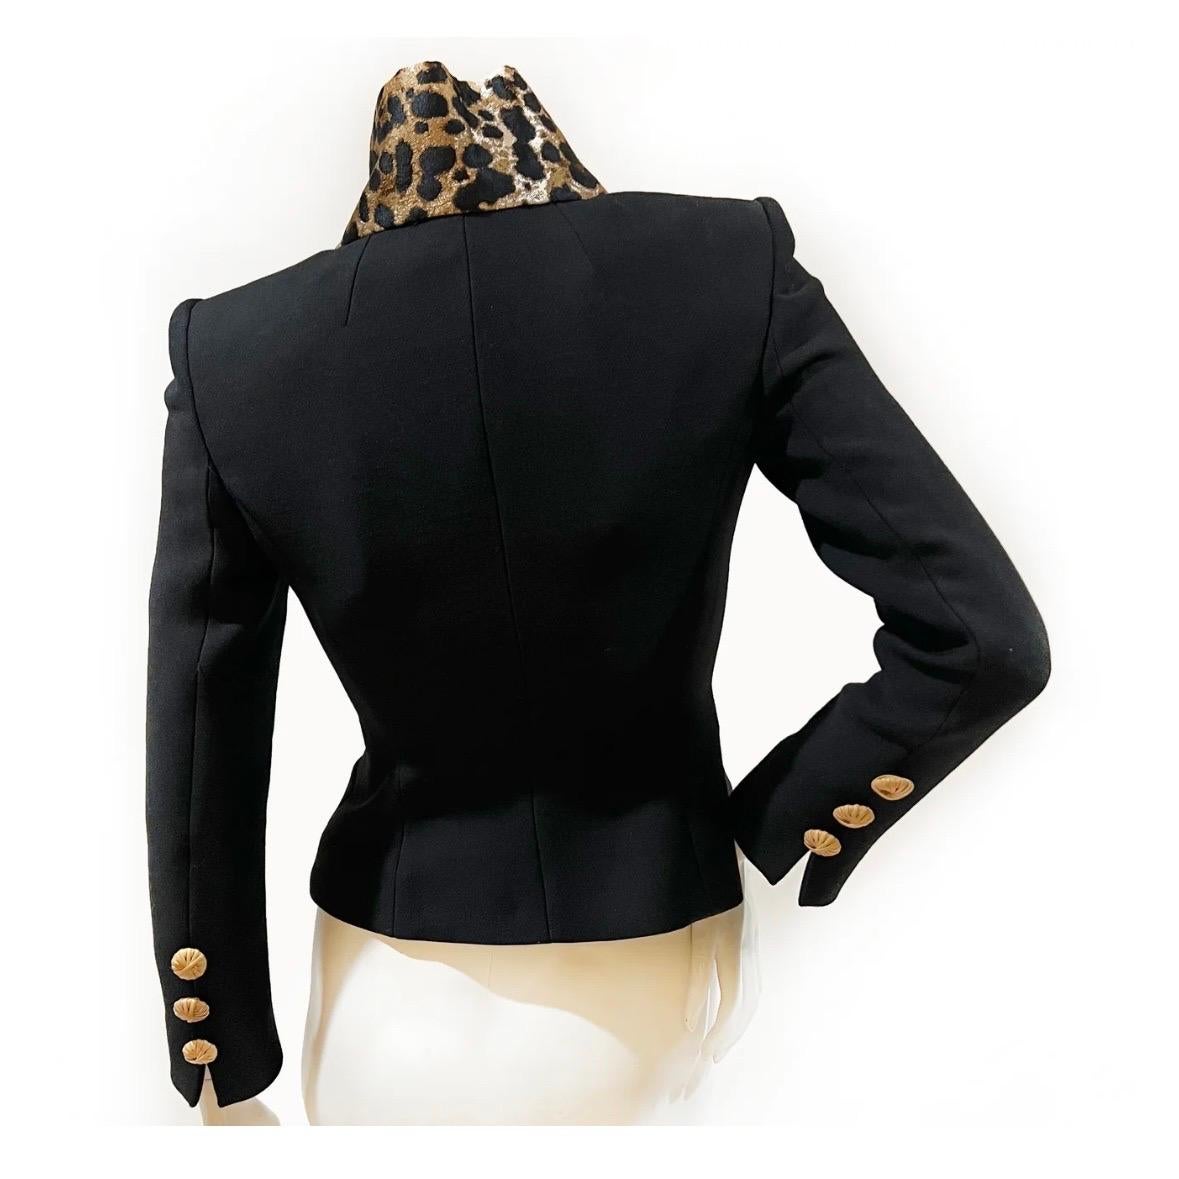 Dolce & Gabbana Leopard Jacket Spring2020 In Excellent Condition For Sale In Los Angeles, CA